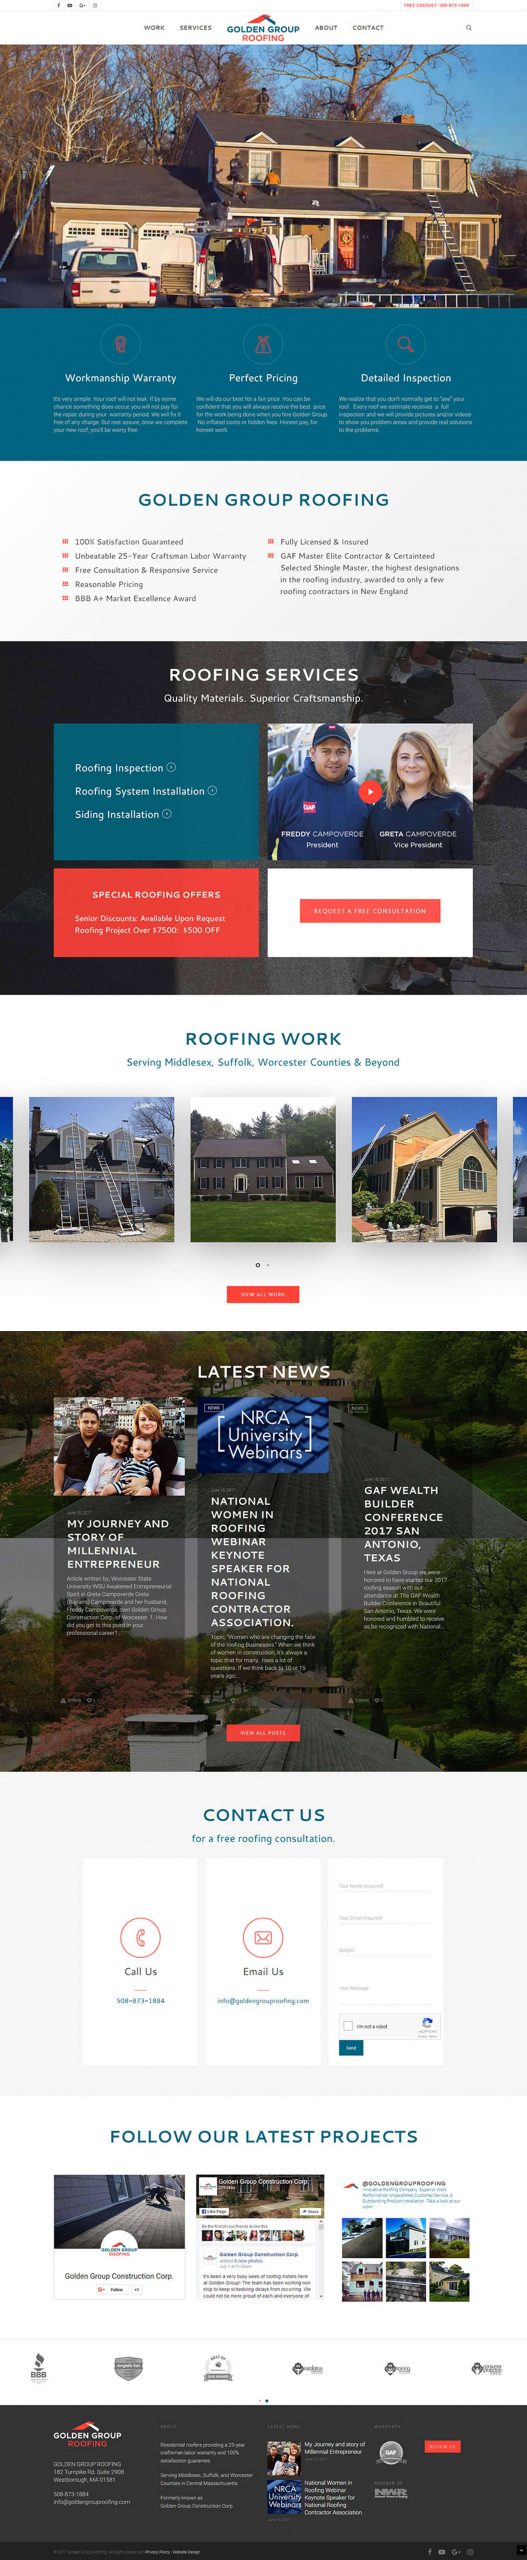 golden group roofing homepage copy 1